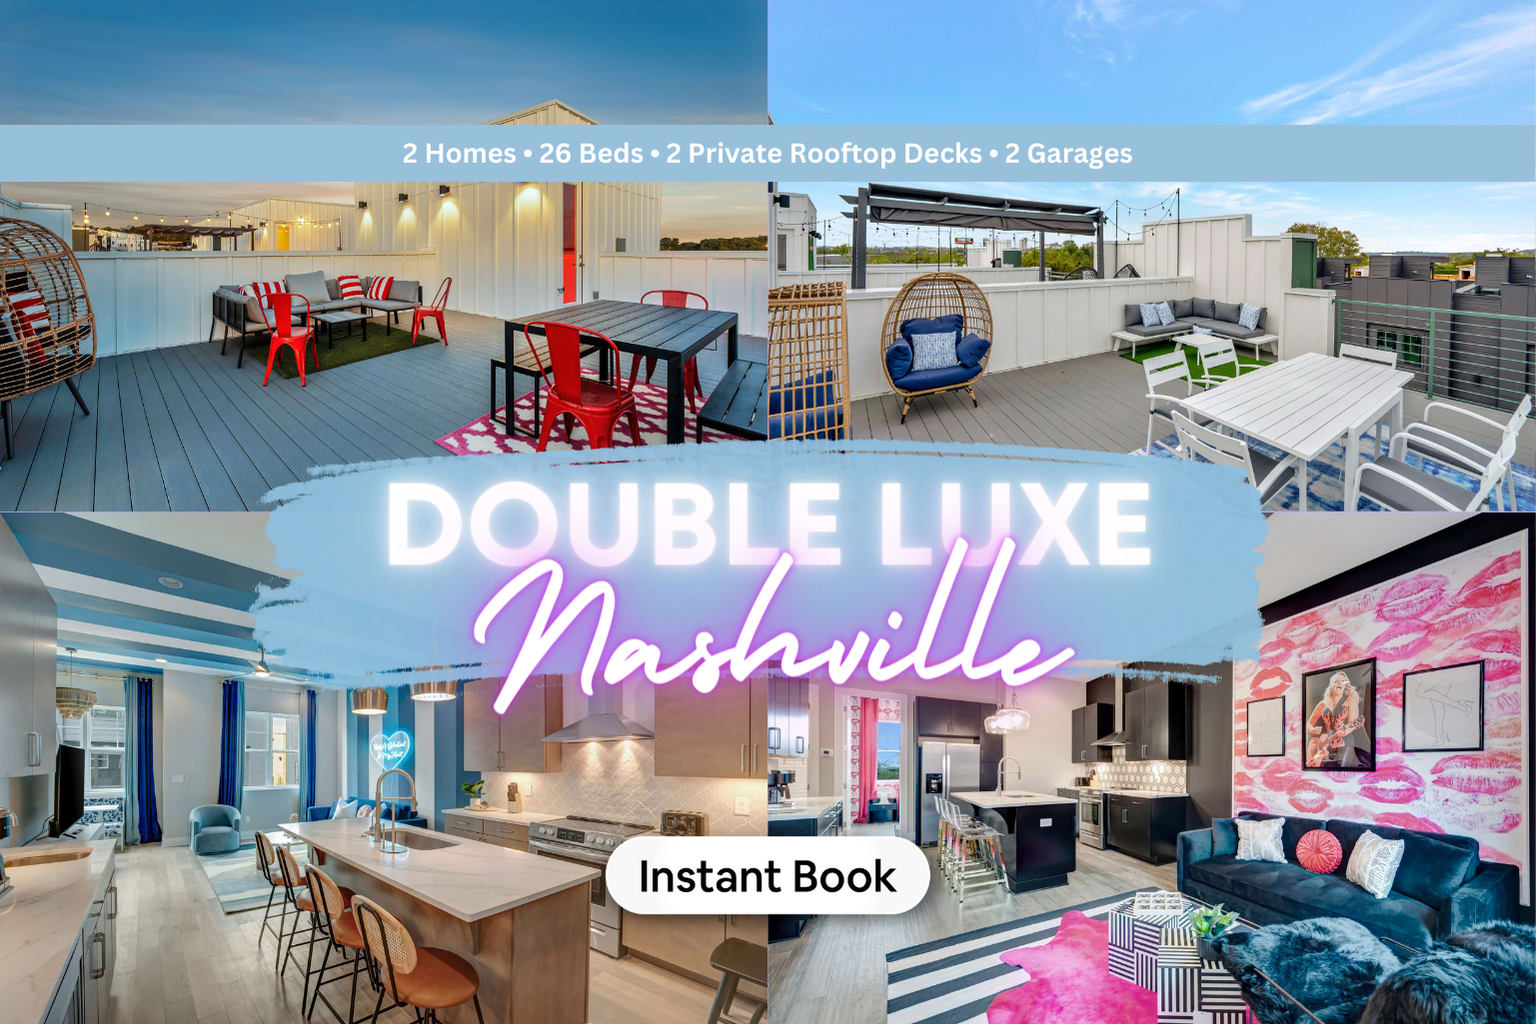 Immerse yourself in the vibrant heart of Music City with the 'Double Luxe Nashville' luxury vacation rental from Misfit Homes! Perfect for any Nashville vacation, from bachelorette parties to family getaways, this gem boasts stylish interiors, ample lounging spots on two private rooftops, and a location that sings. Gather your group and let the spirit of Nashville embrace you—book this unforgettable vacation rental today and make your next group trip extraordinary! 🎸✨